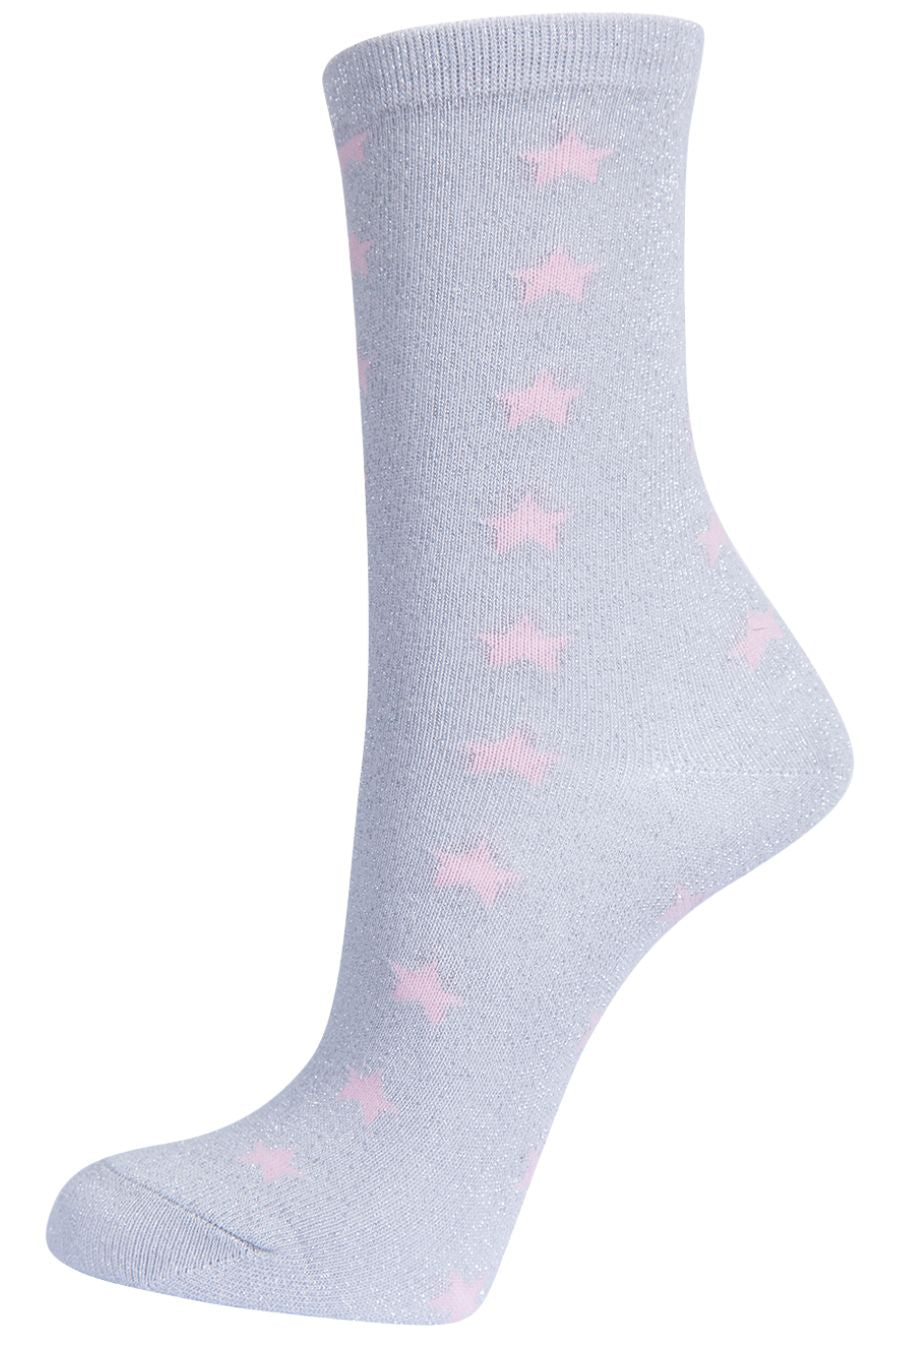 grey and pink star print silver glitter ankle socks